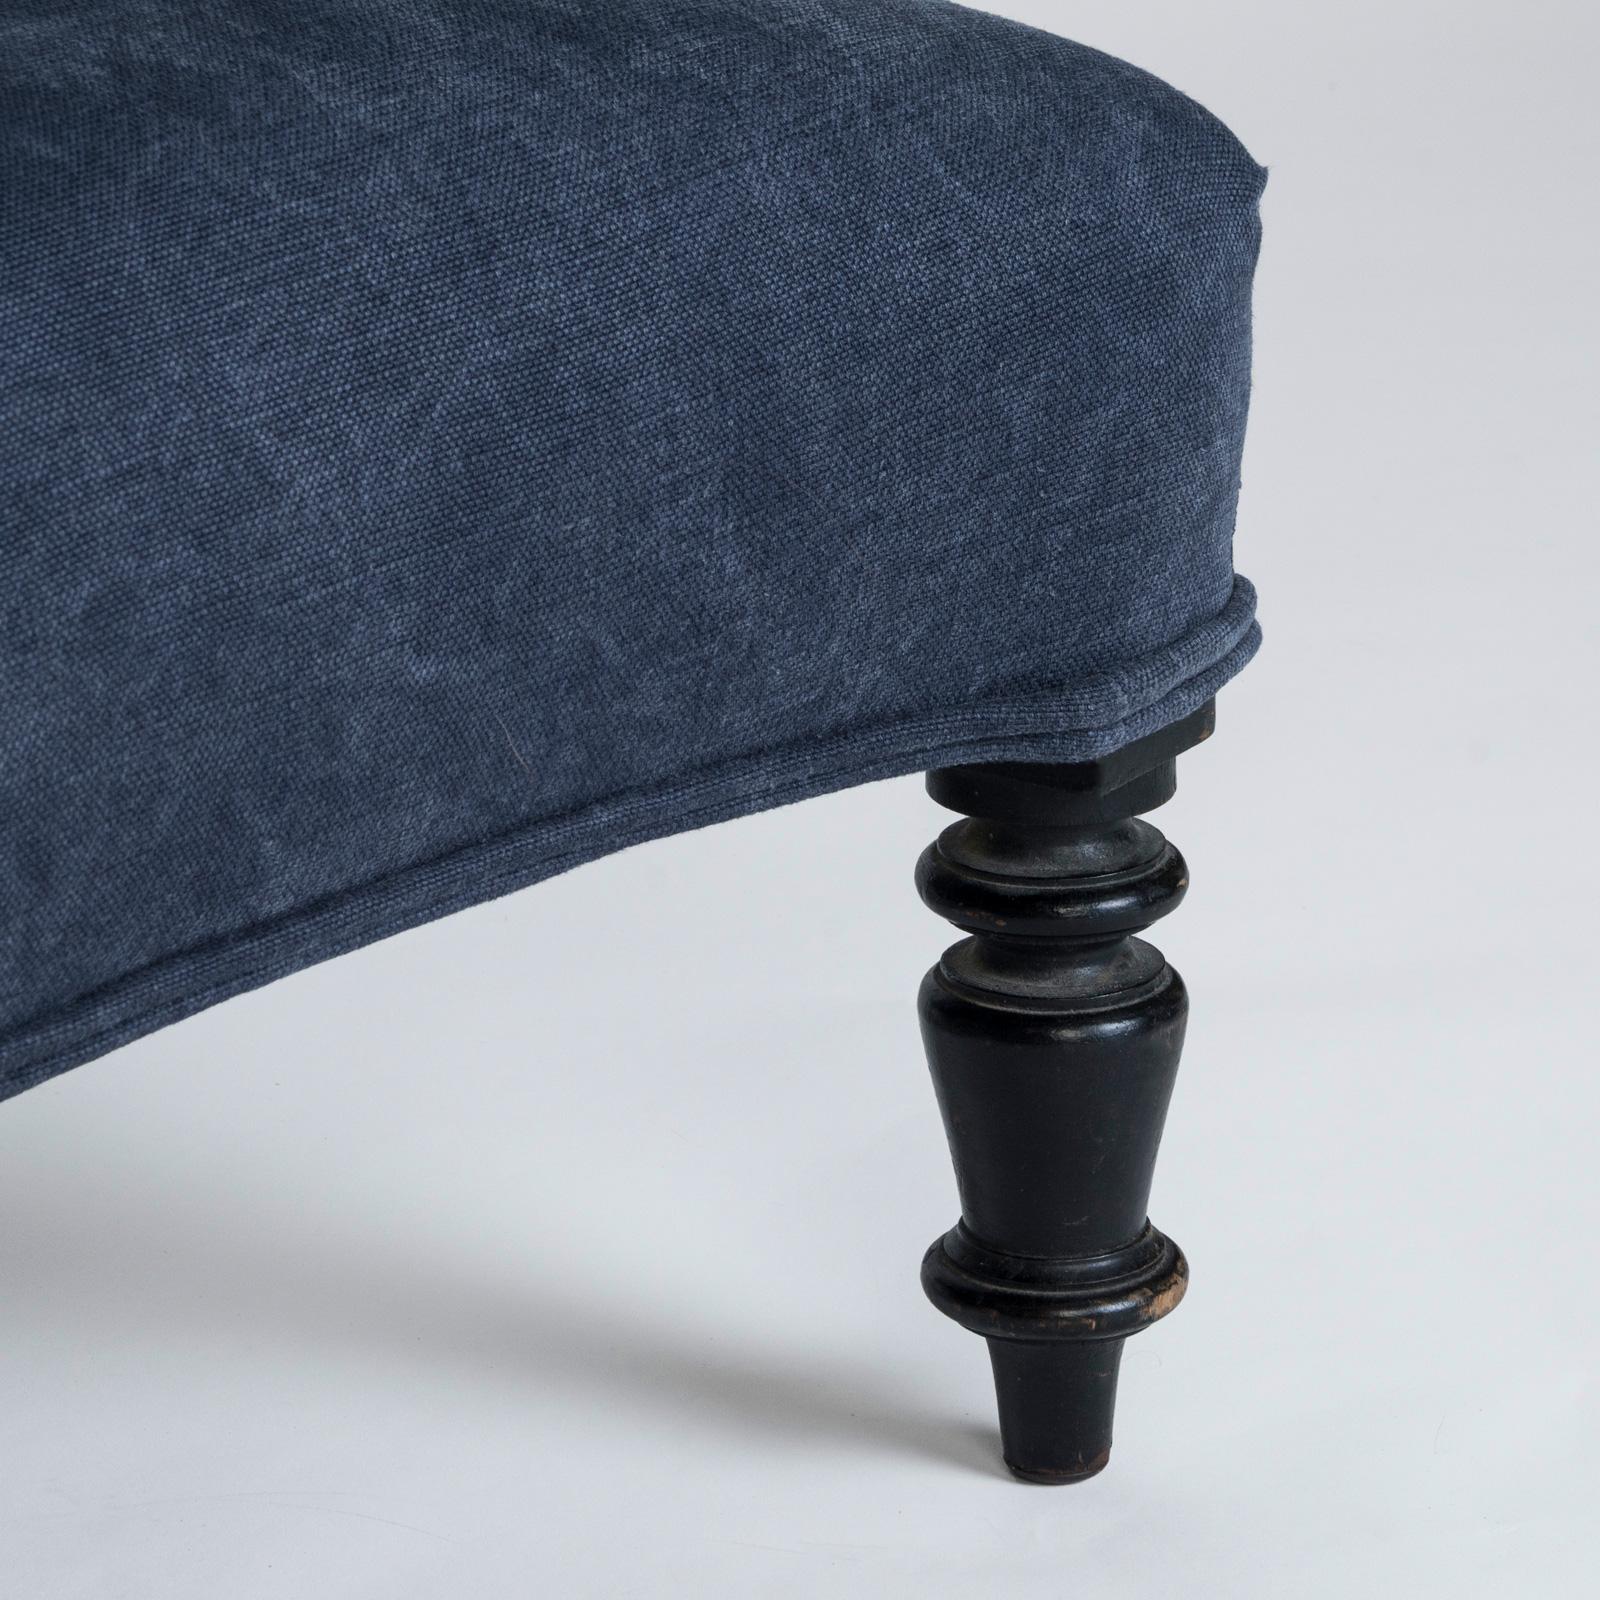 Refined 19th Century Napoleon III Style Stool or Foot Bench with a distinctive blue linen upholstery.

This exquisite stool serves as a comfortable complement to any sofa, doubling as an additional seat when needed. The upholstery has been recently